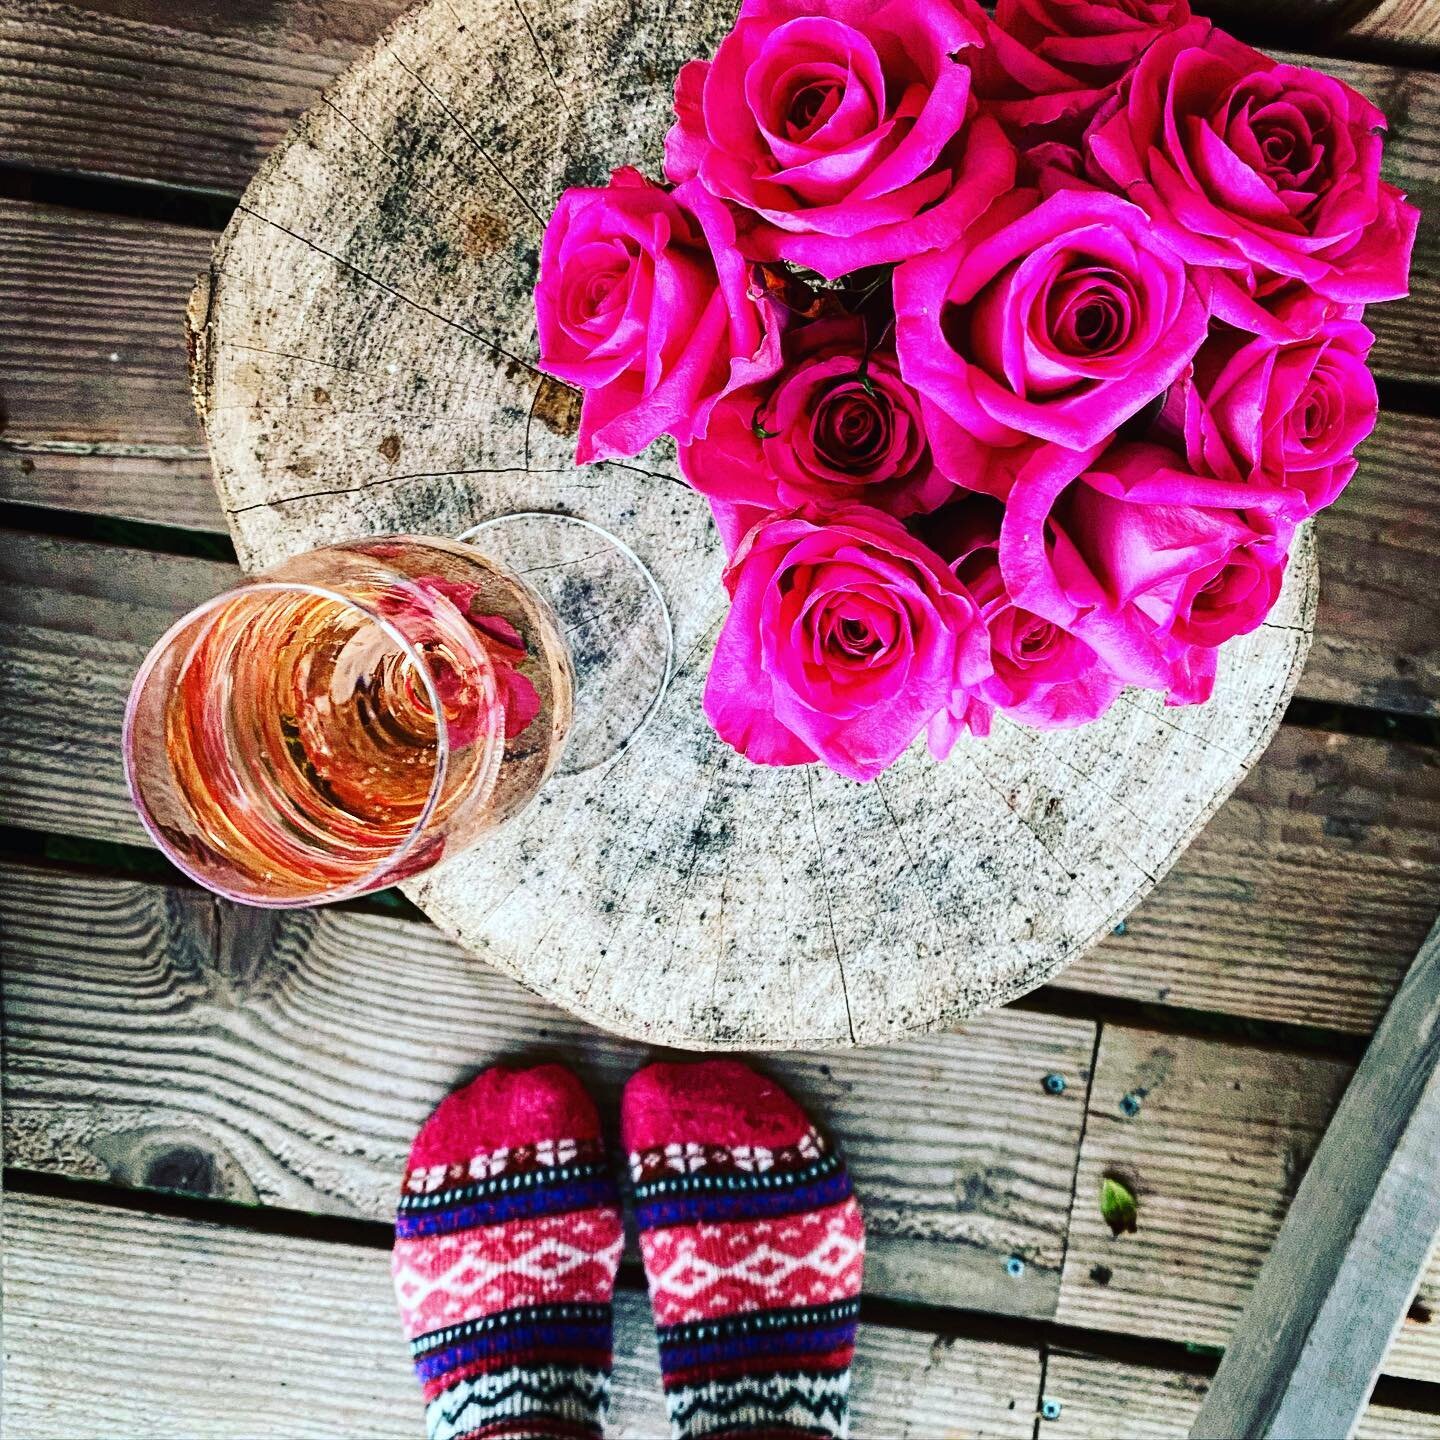 Things my sister loved. Pink wine, flowers, me. When someone dies you lose so much, but part of it is the loss of being loved in the way that they loved you. I ache for the way she loved me, that sisterly bond that never broke, the way she loved my f